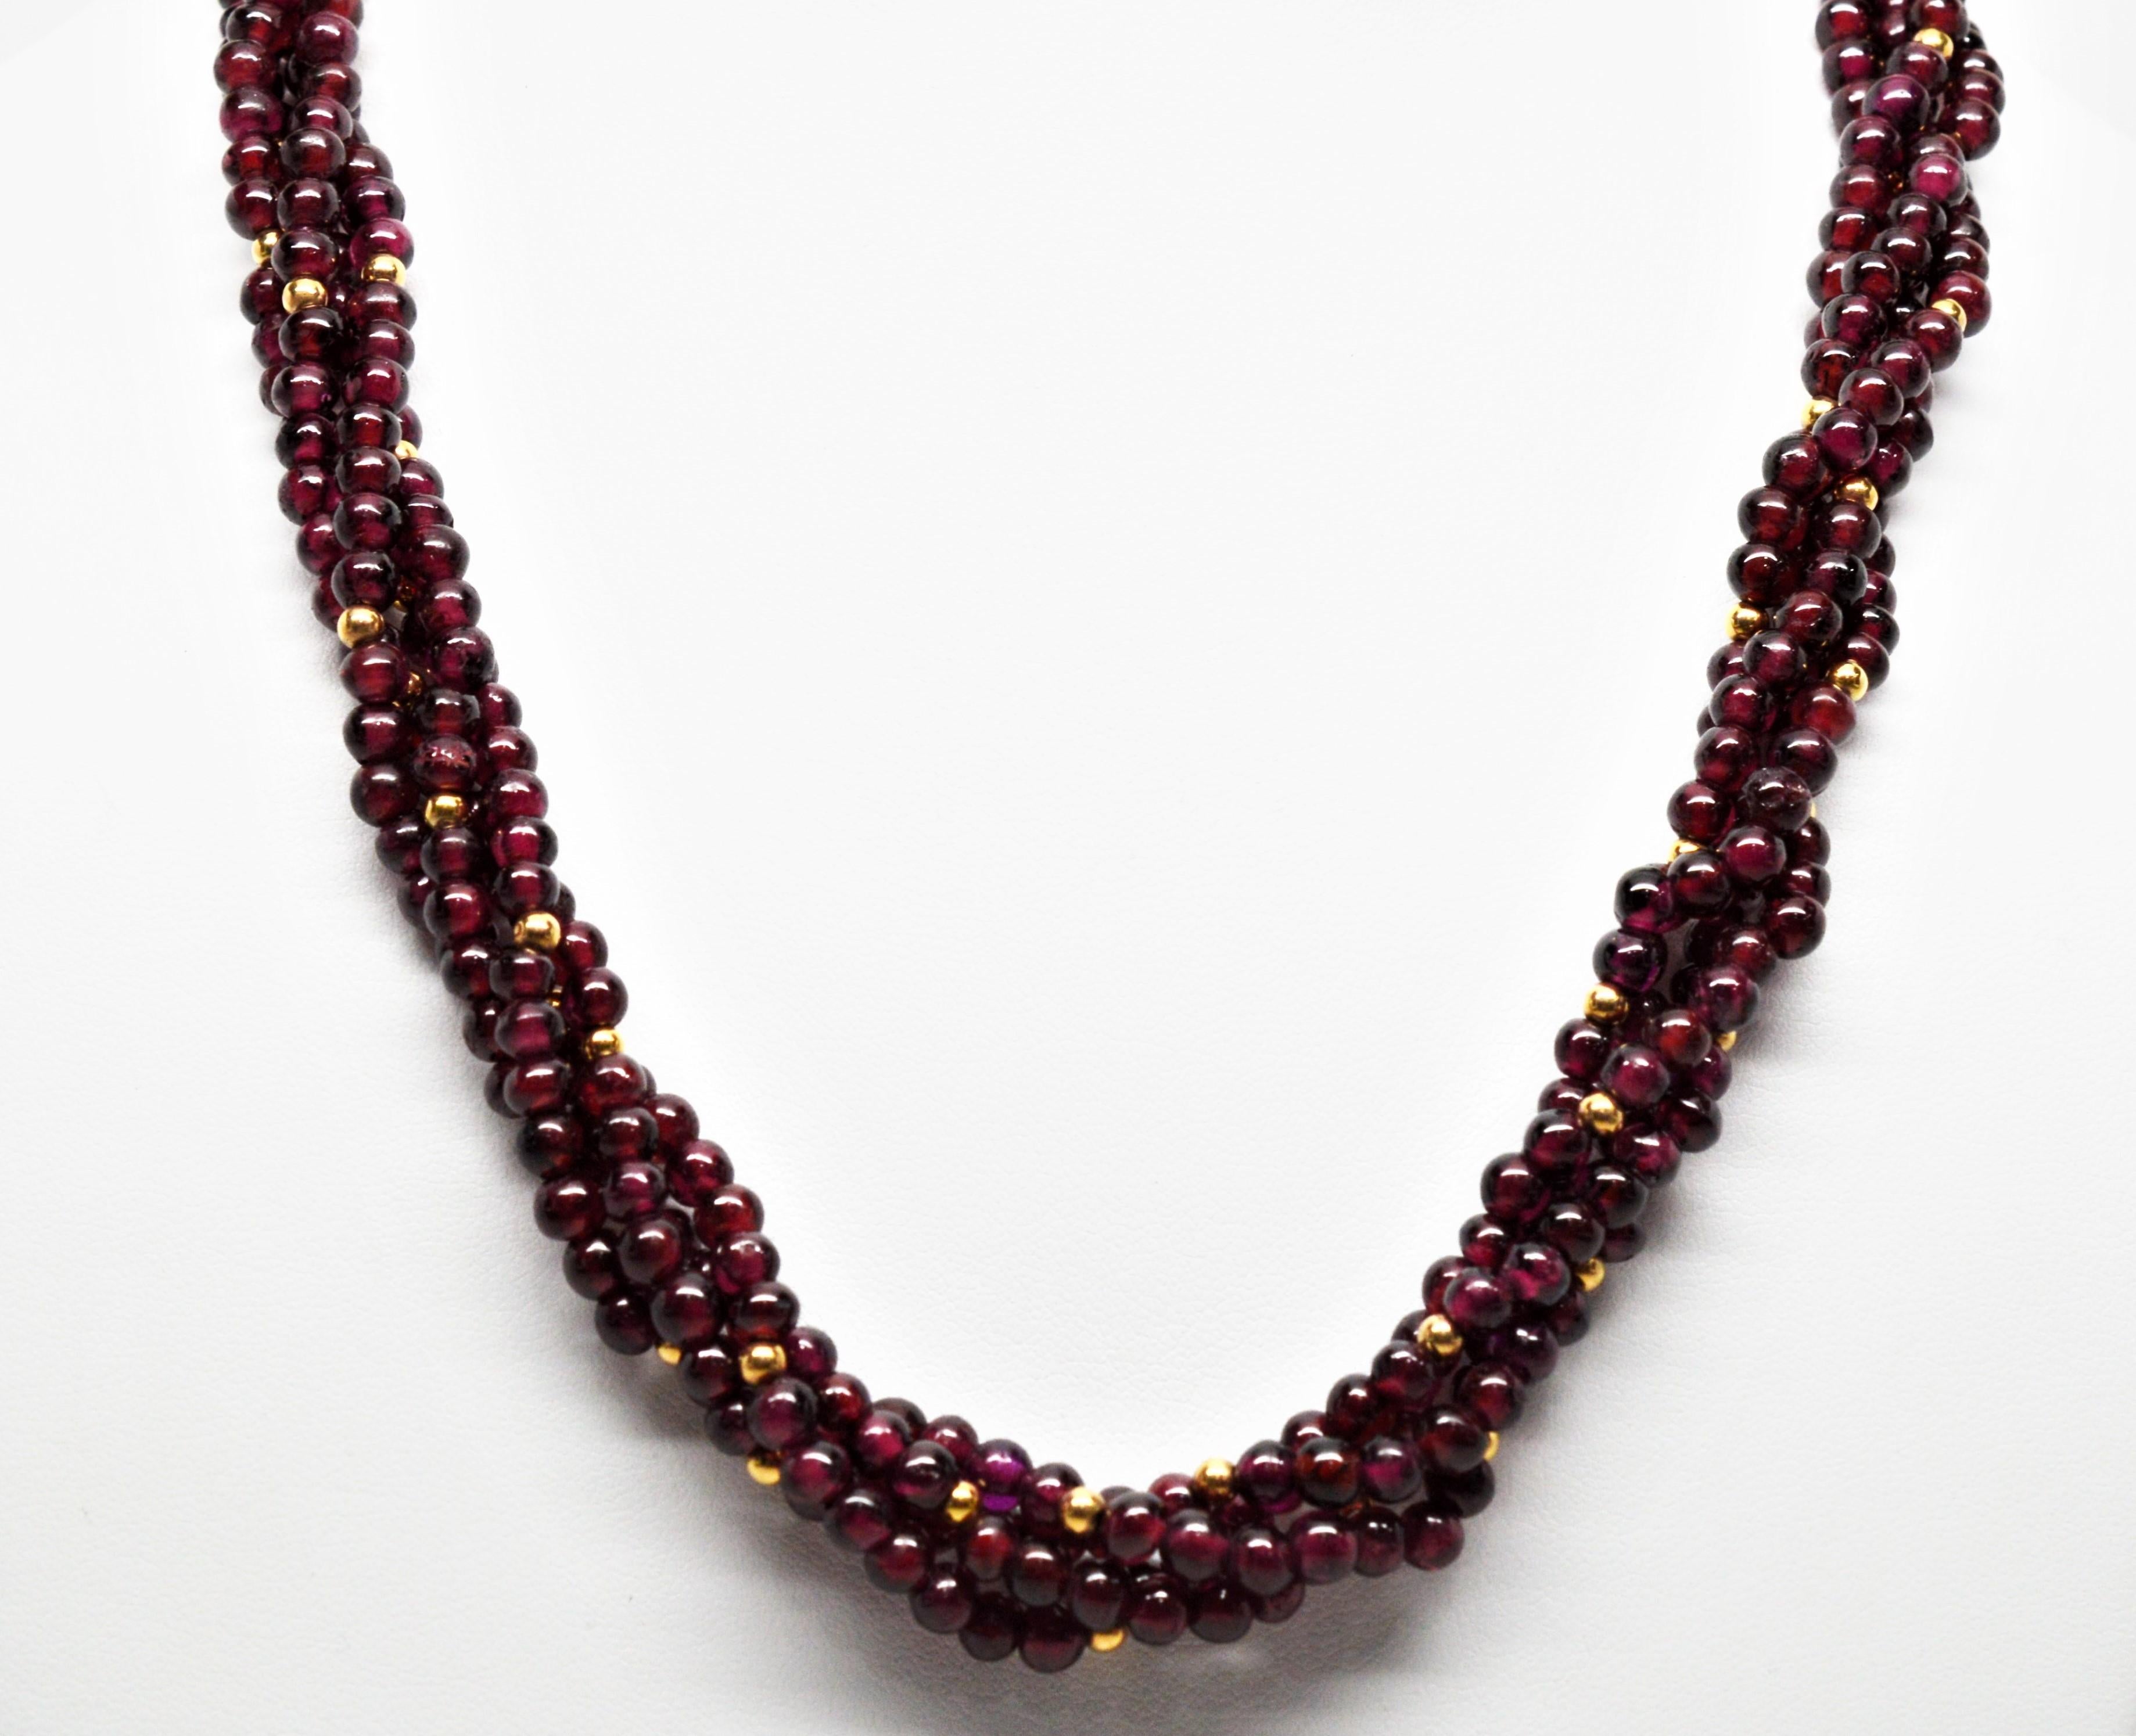 Women's Garnet Bead Multi Strand Necklace with Fancy Yellow Gold Filigree Clasp